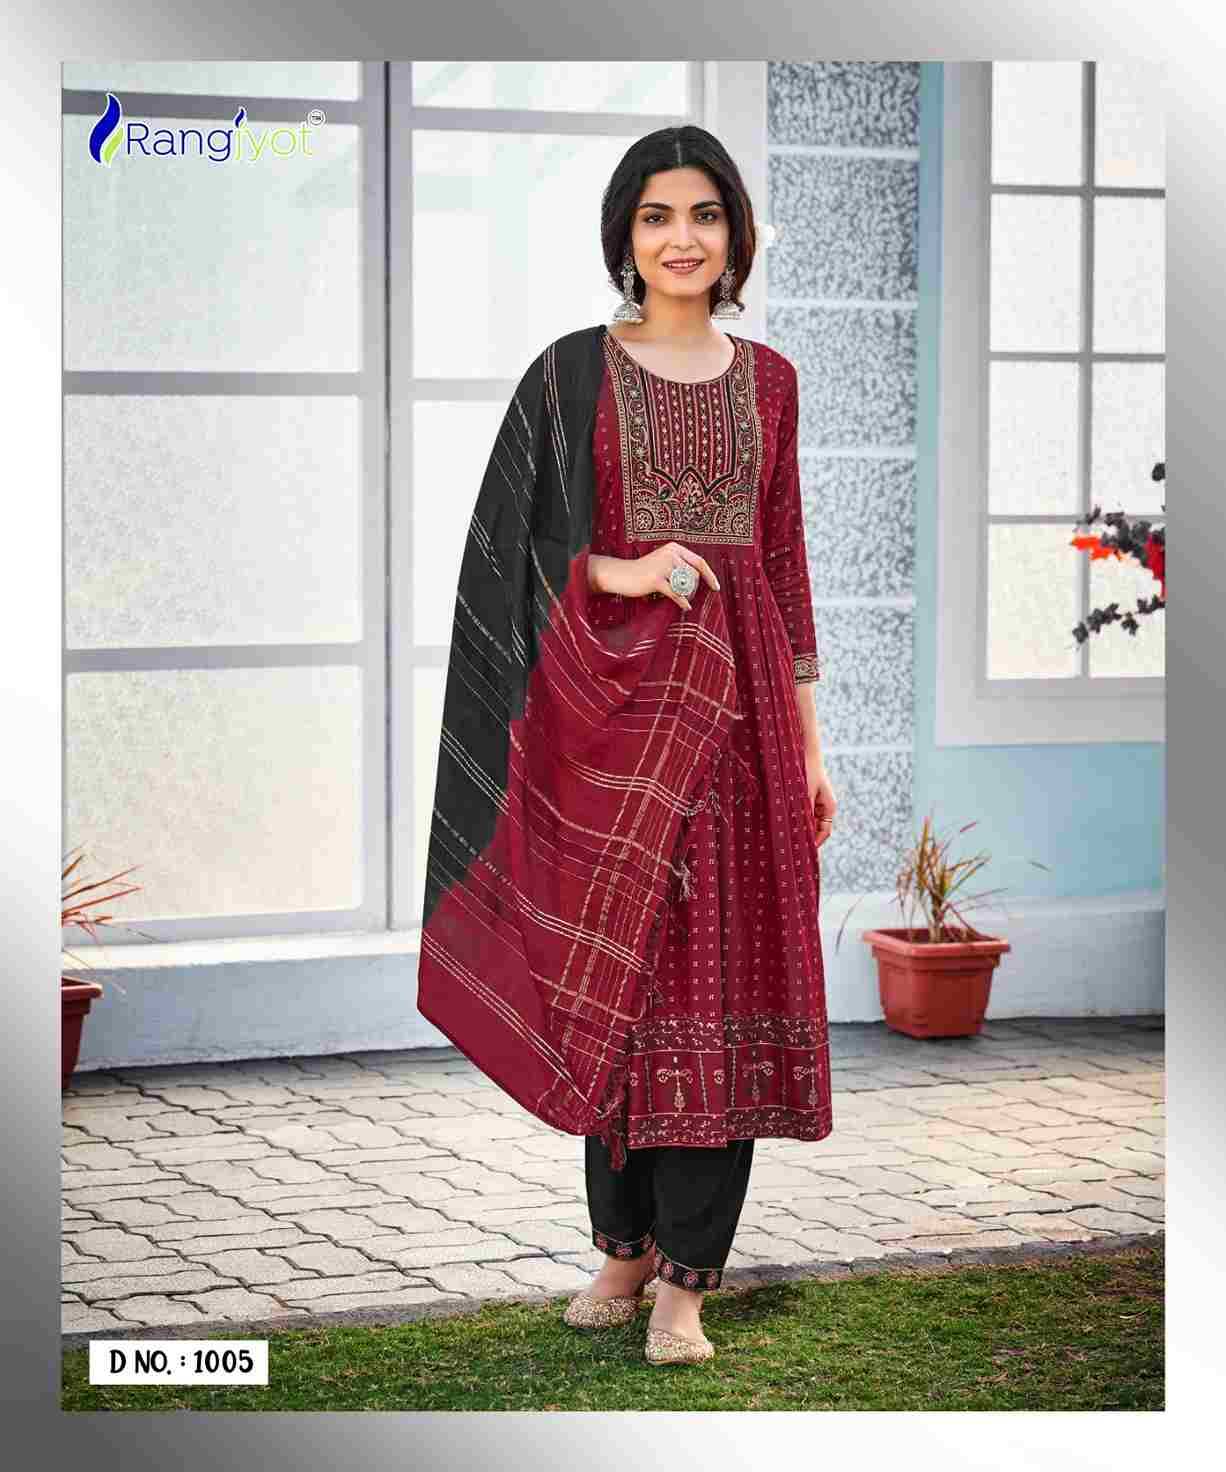 Rang Manch Vol-2 By Rangjyot Fashion 1001 To 1008 Series Designer Festive Suits Beautiful Fancy Colorful Stylish Party Wear & Occasional Wear Heavy Rayon Print Dresses At Wholesale Price